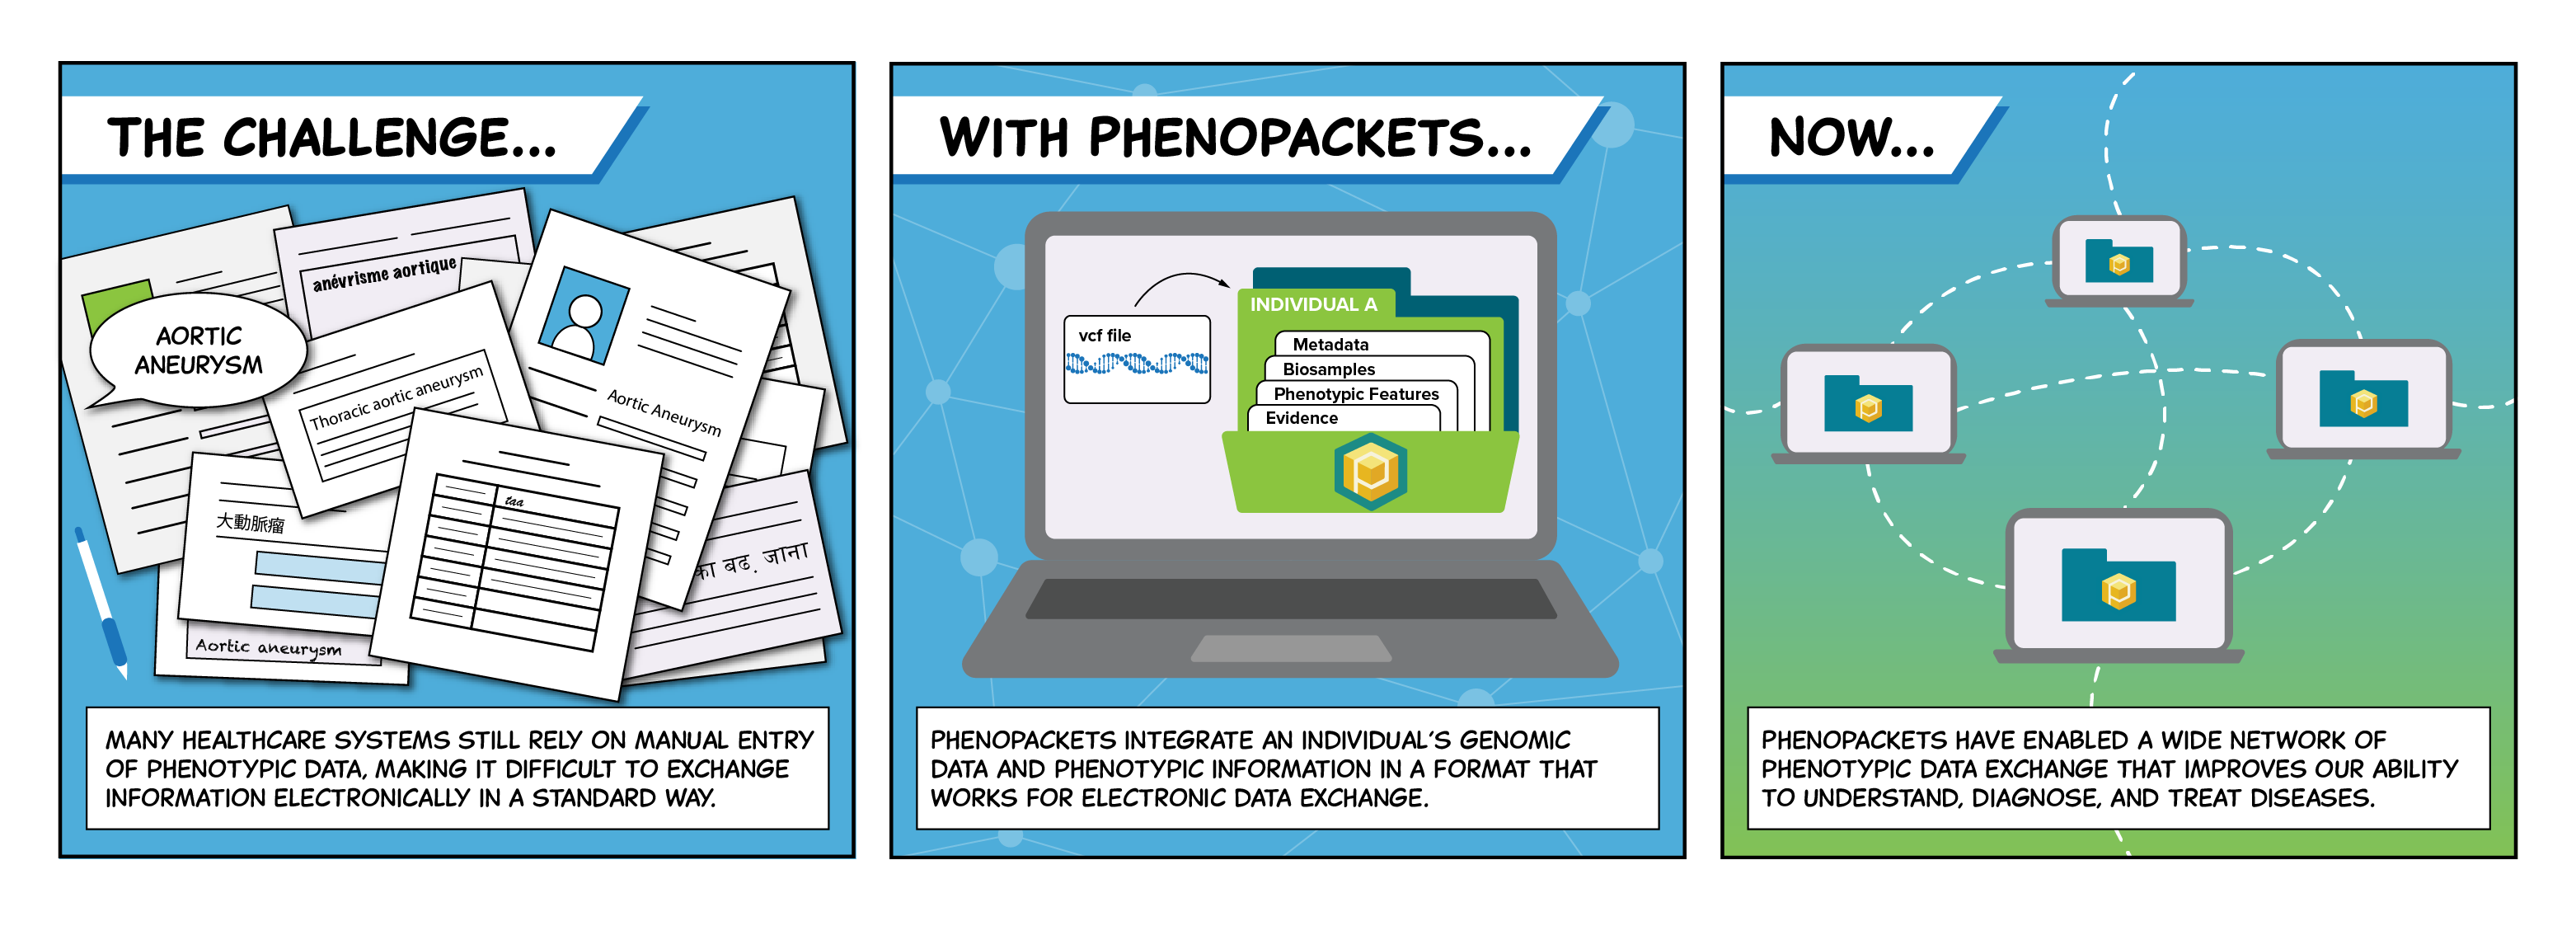 A three-panel comic demonstrating how Phenopackets aims to enable the electronic sharing of phenotypic data